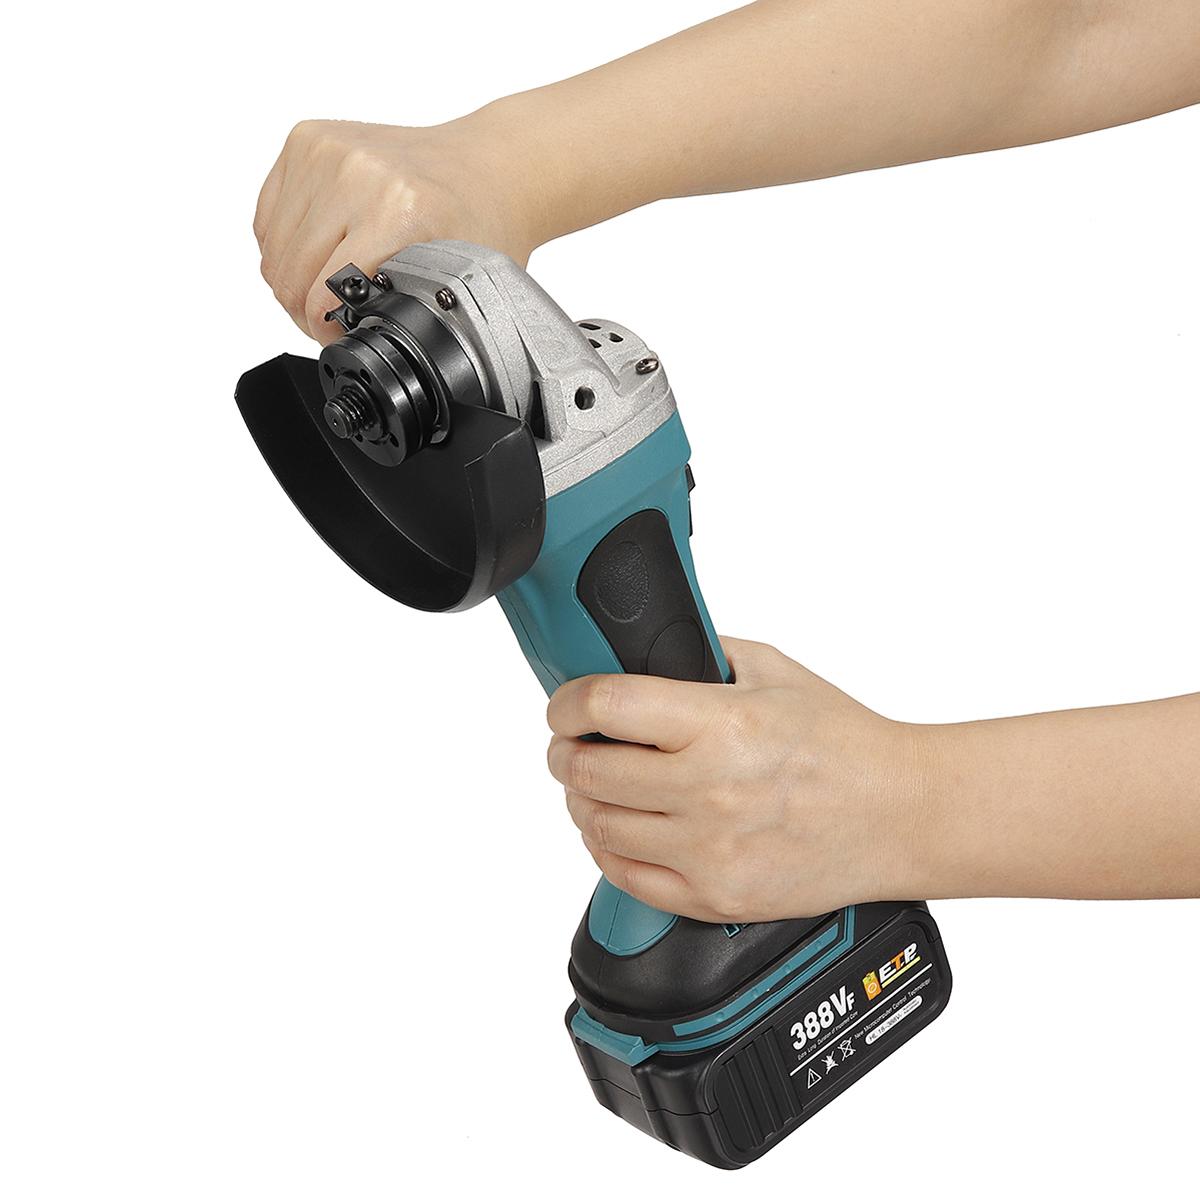 Drillpro-388VF-125mm-BlueBalck-Brushless-Motor-8500rpm-800W-Compact-Lithium-Electric-Polisher-1962696-18